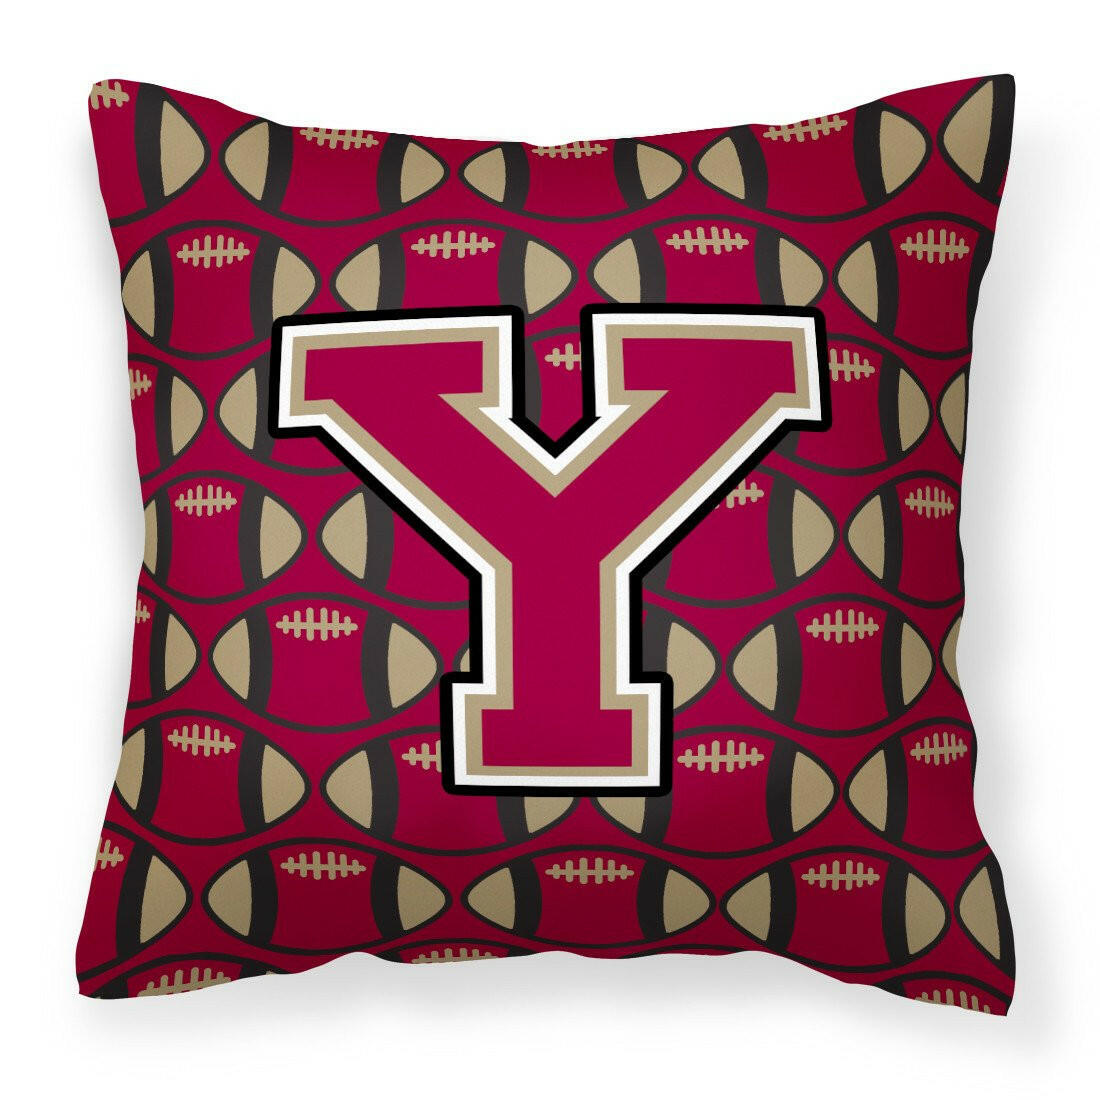 Letter Y Football Garnet and Gold Fabric Decorative Pillow CJ1078-YPW1414 by Caroline's Treasures